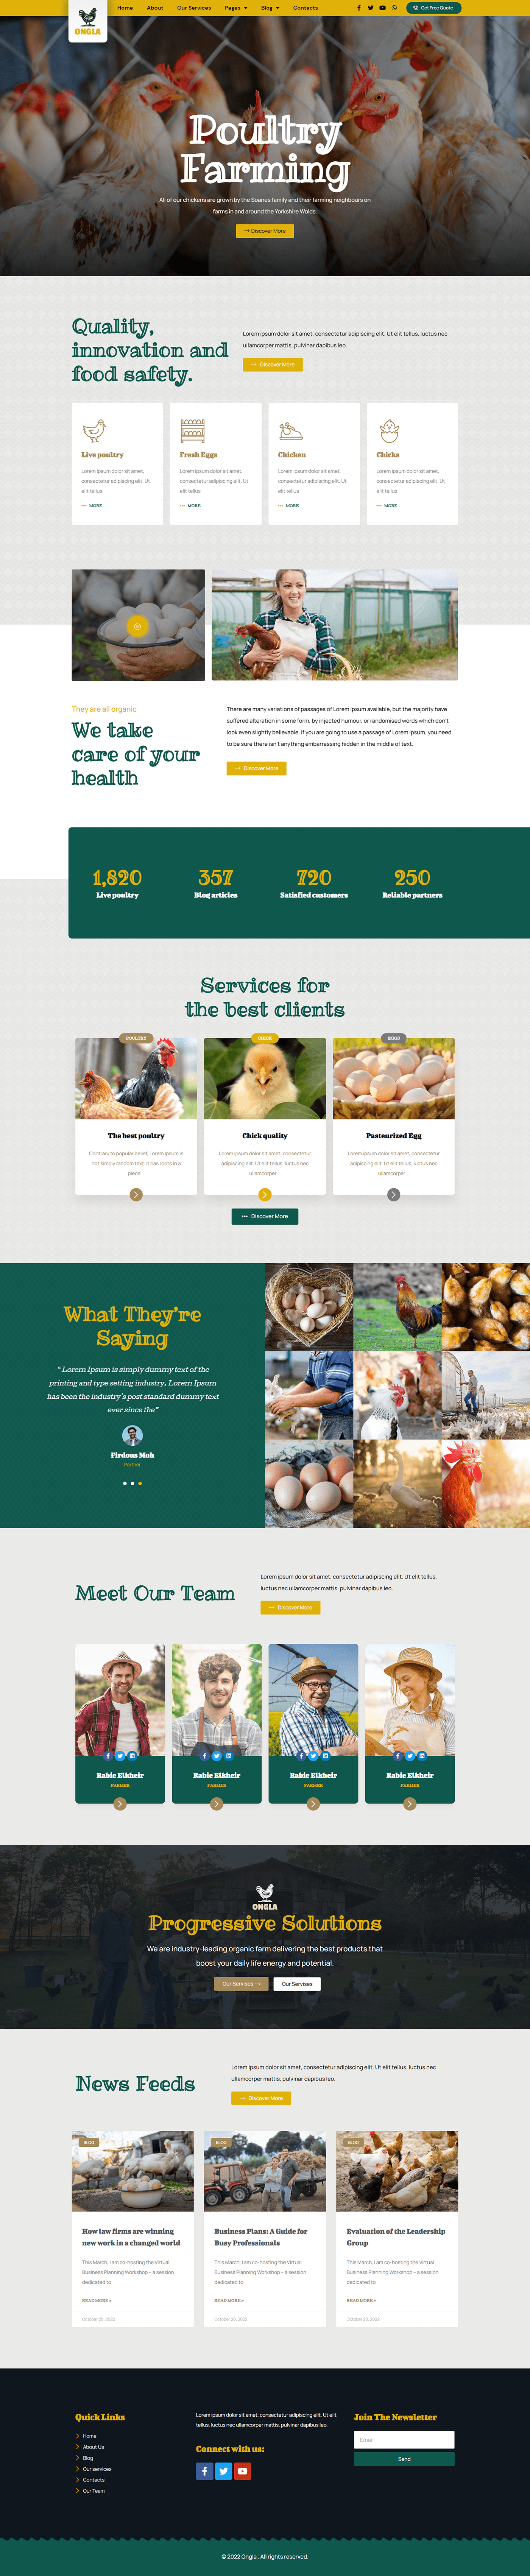 poultry farming agriculture Livestock Agribusiness Web Design  animal husbandry farm management  Food production organic farming sustainable agriculture